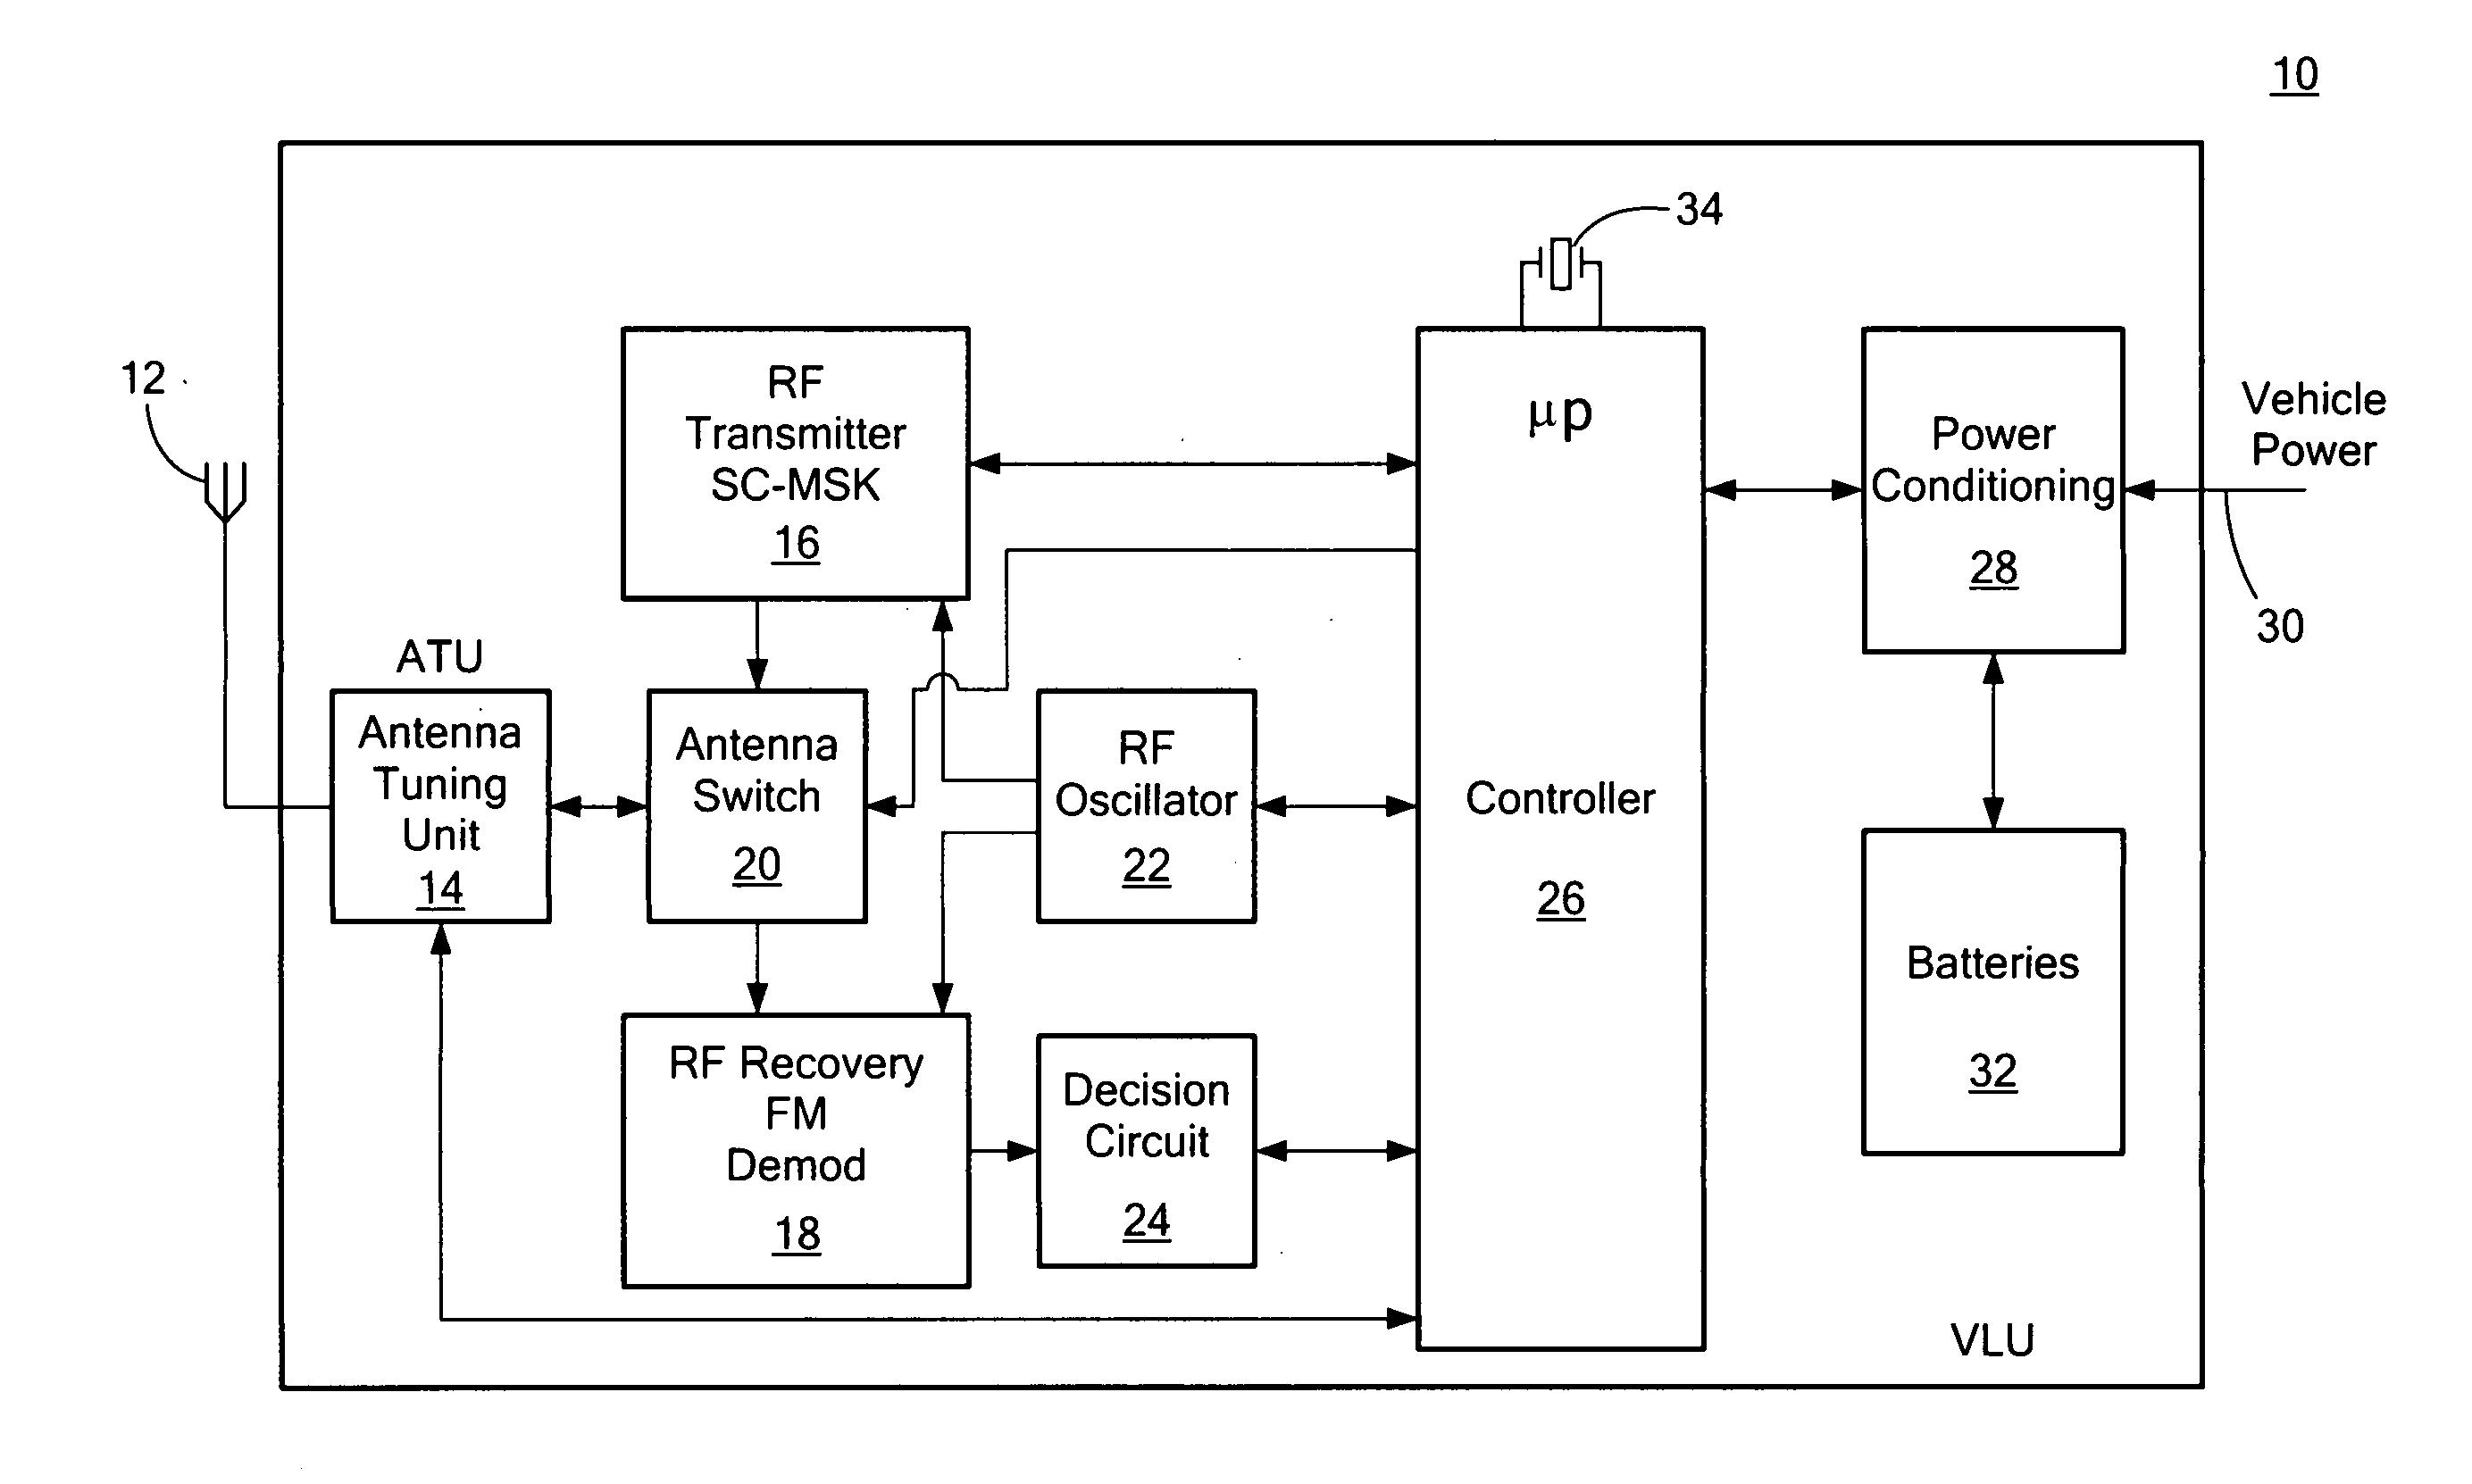 Synchronization system and method for achieving low power battery operation of a vehicle locating unit in a stolen vehicle recovery system which receives periodic transmissions